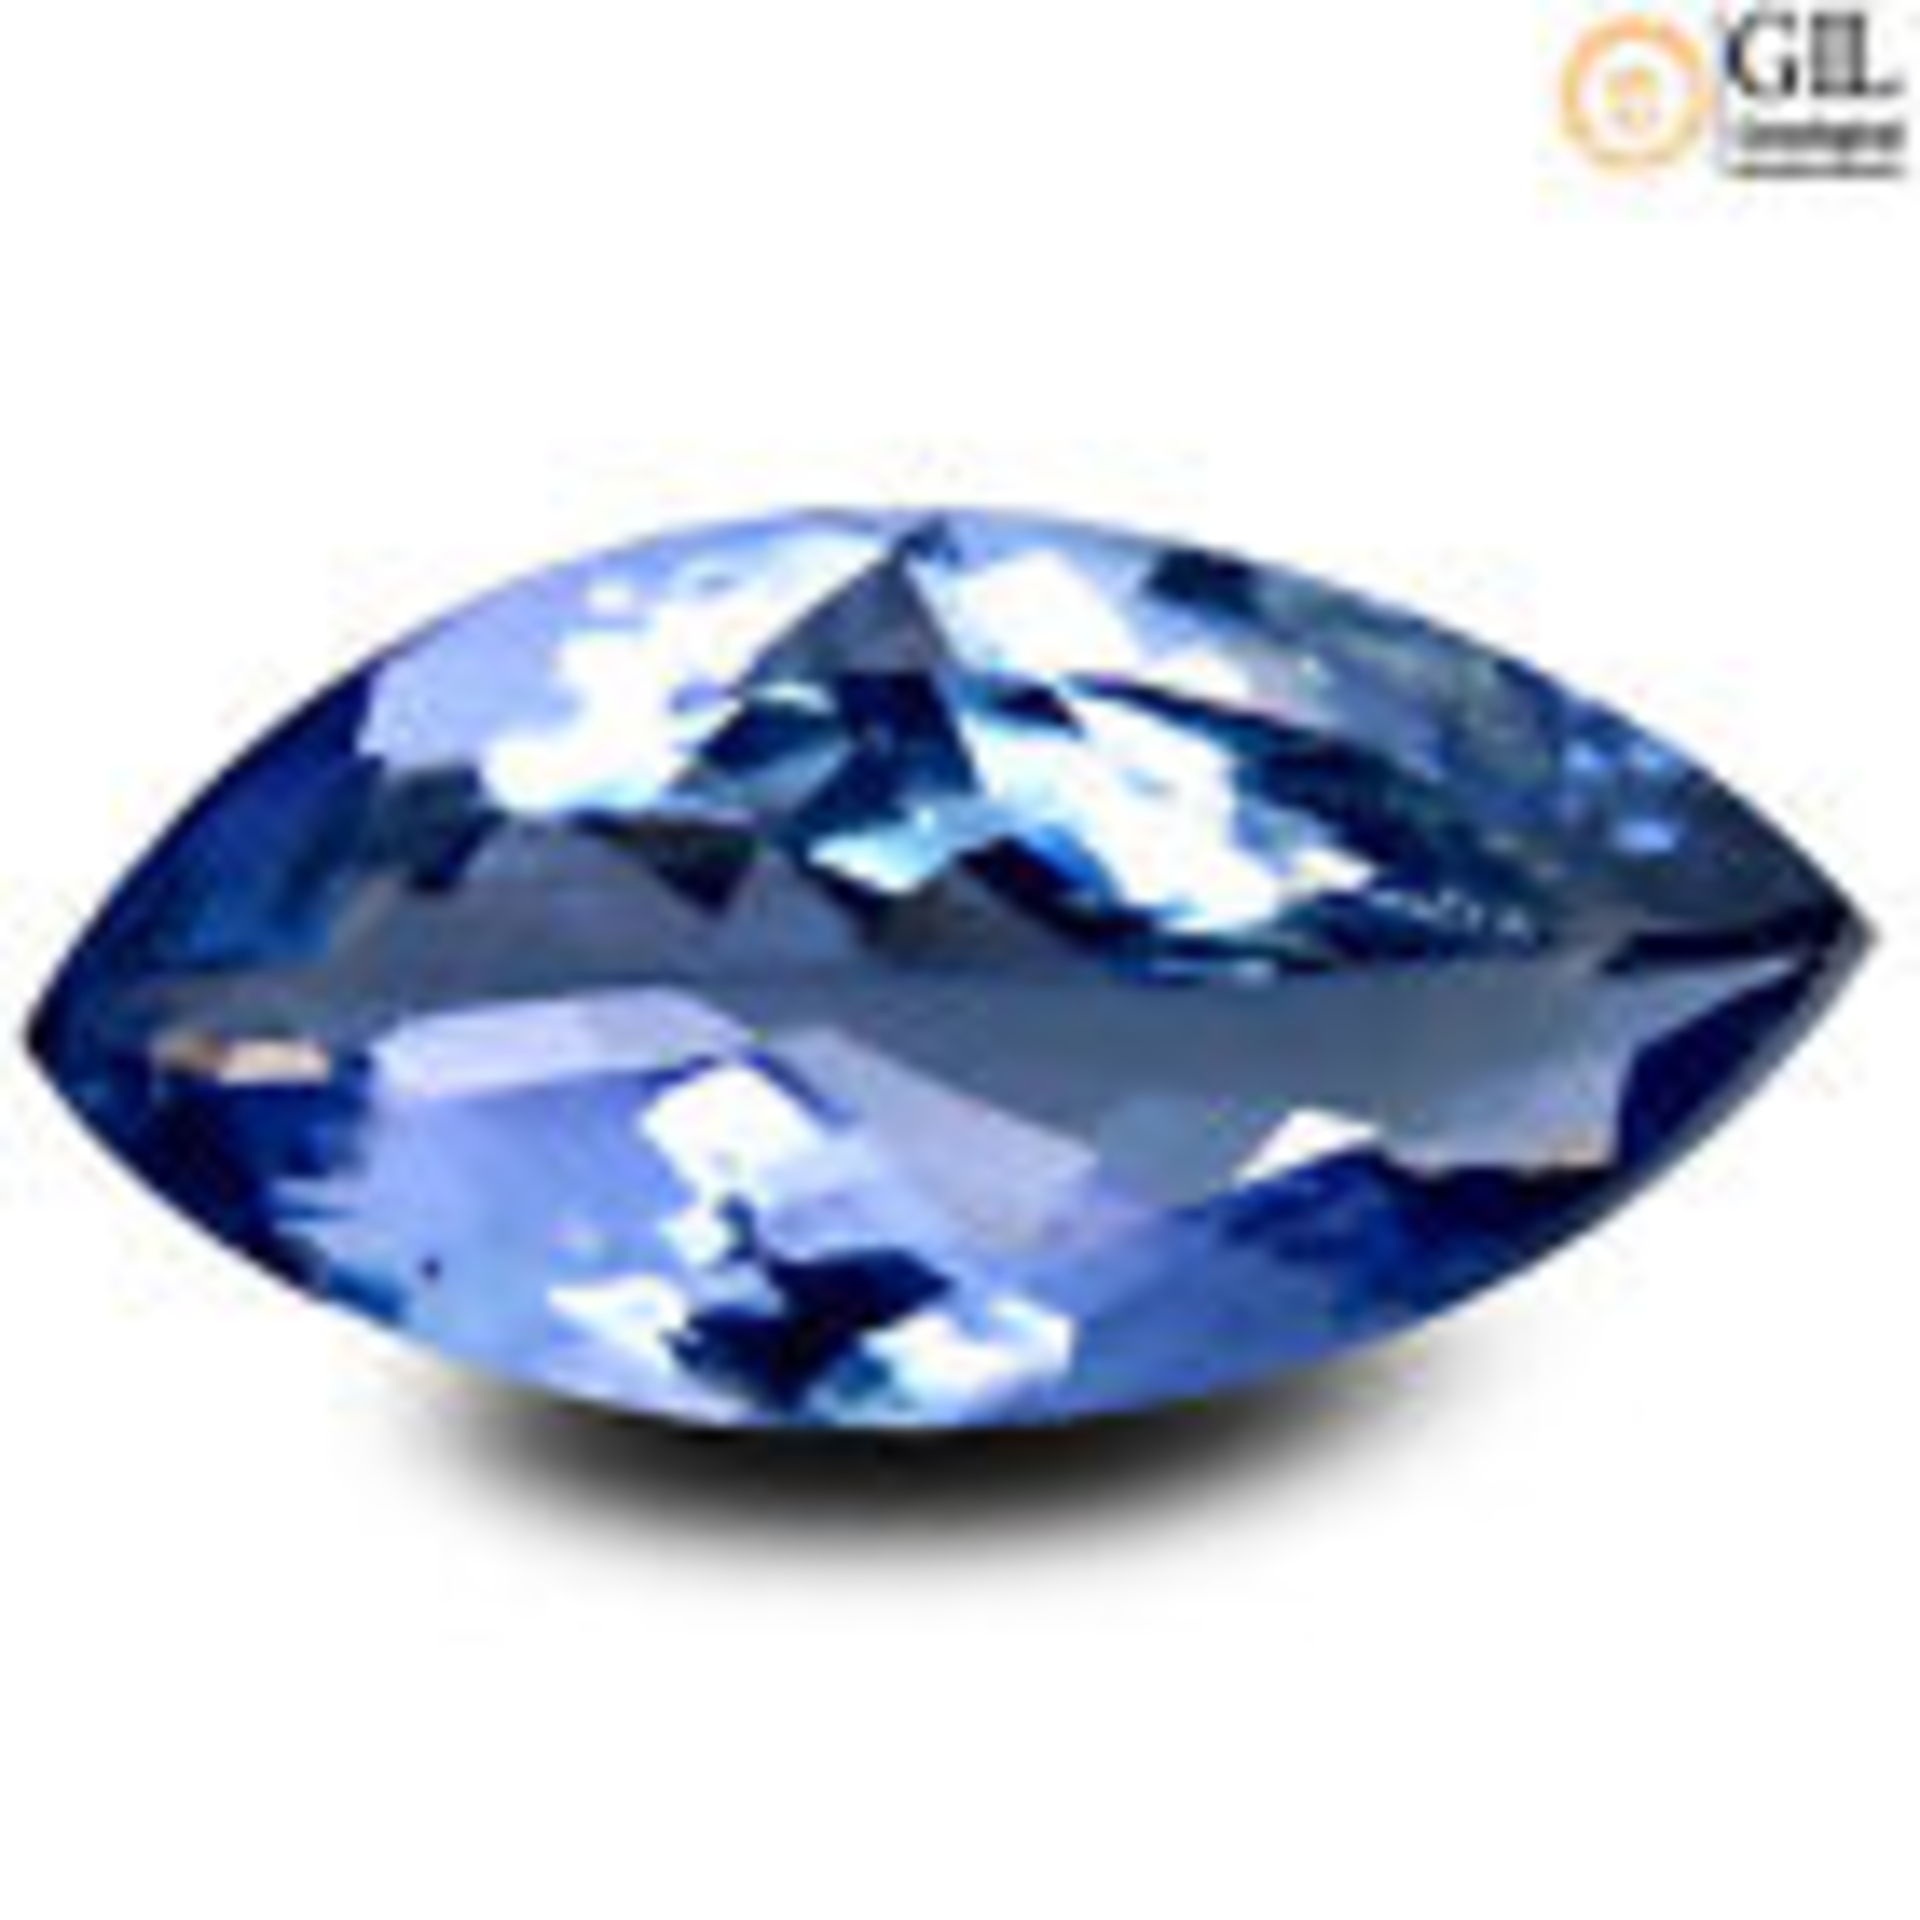 3.38 CT GIL CERTIFIED MARQUISE (15X8MM) TANZANITE